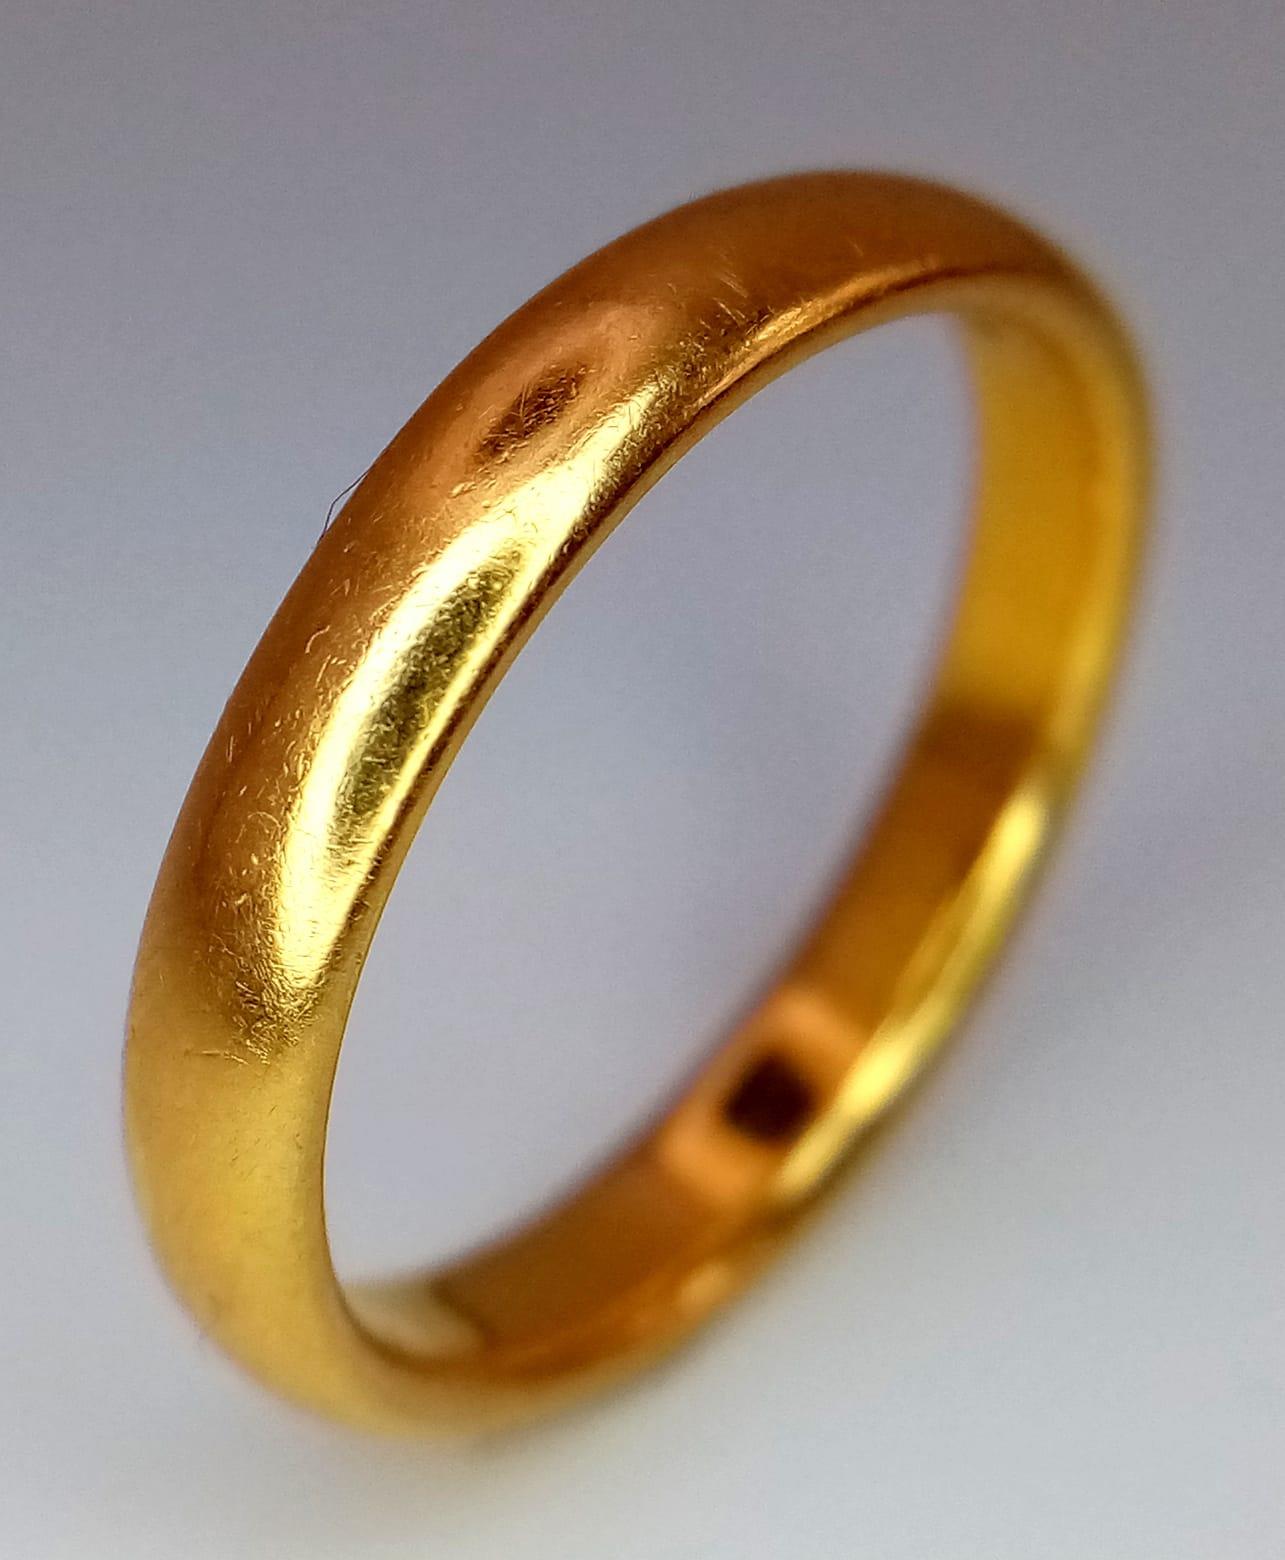 A Vintage 22K Yellow Gold Band Ring. Size P. 5.11g weight. Full UK hallmarks.